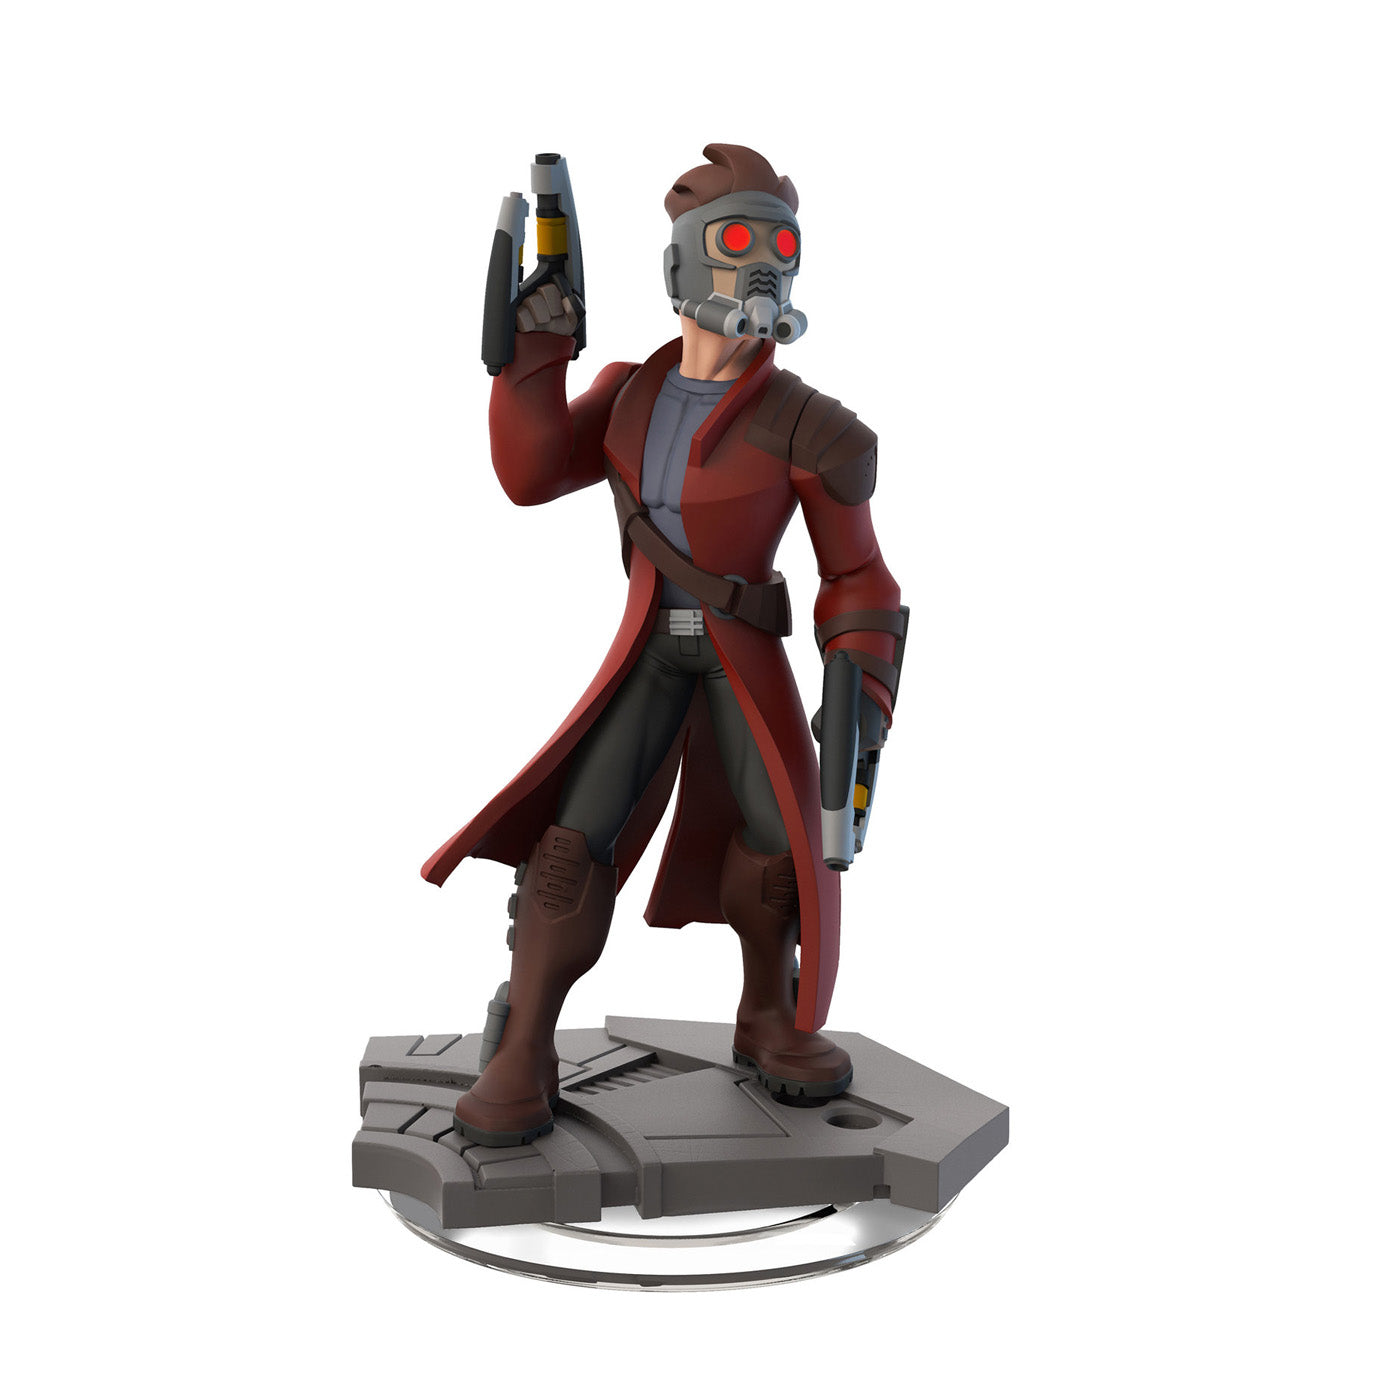 Disney Infinity 2.0 Character: Star Lord